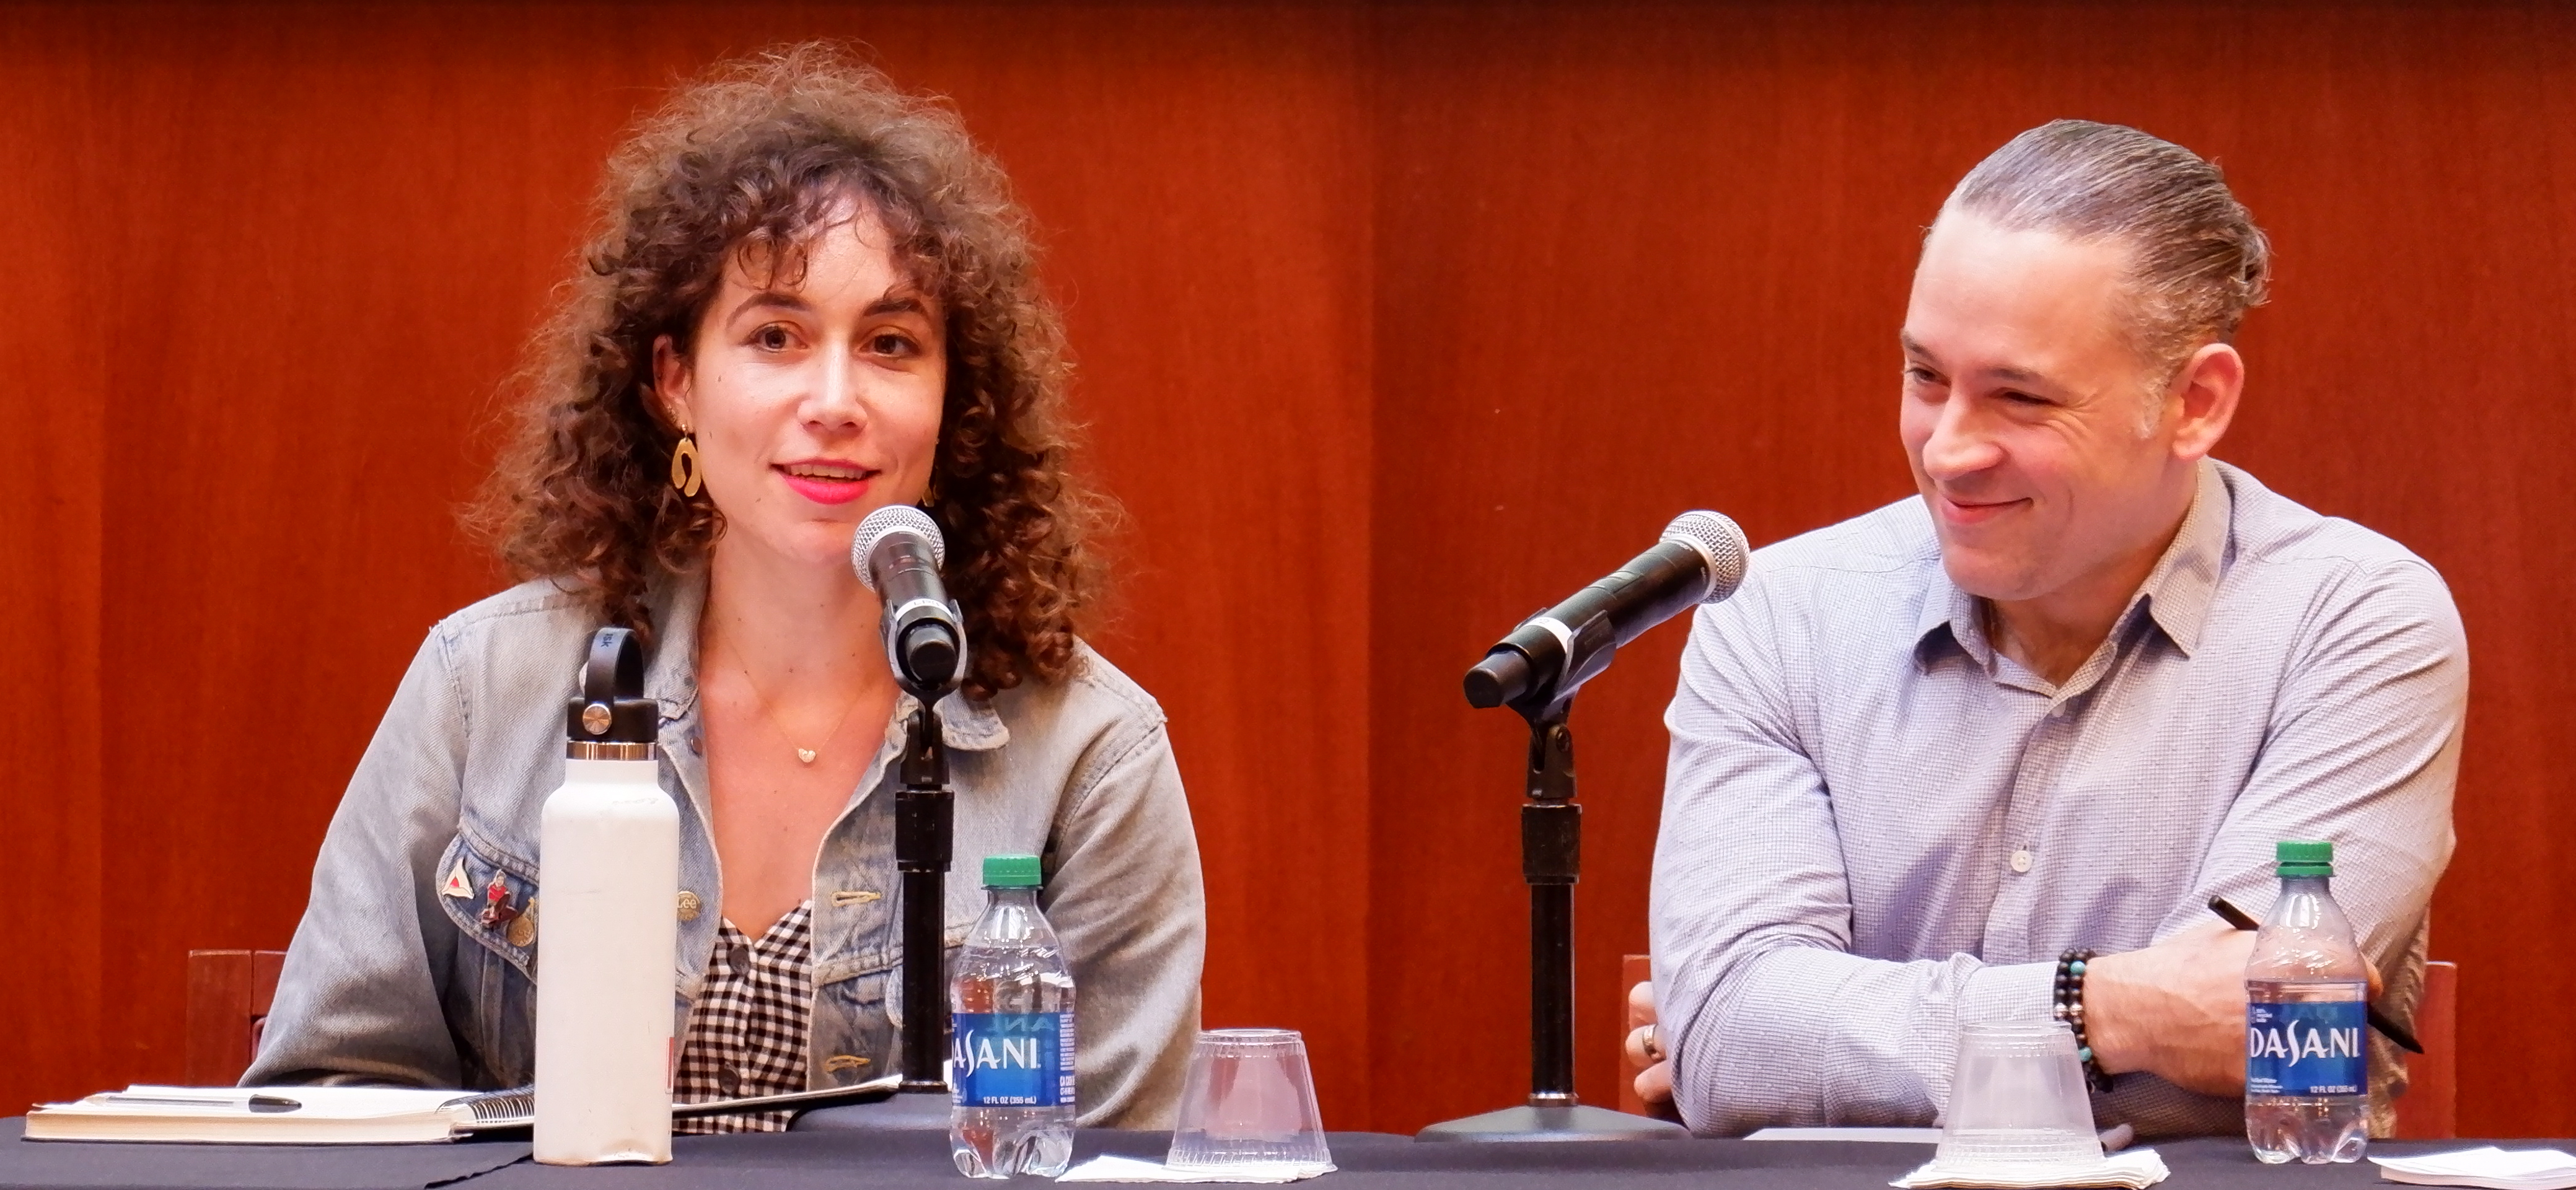 Jennie Rose Halperin and Scott Sholder discussing AI and copyright